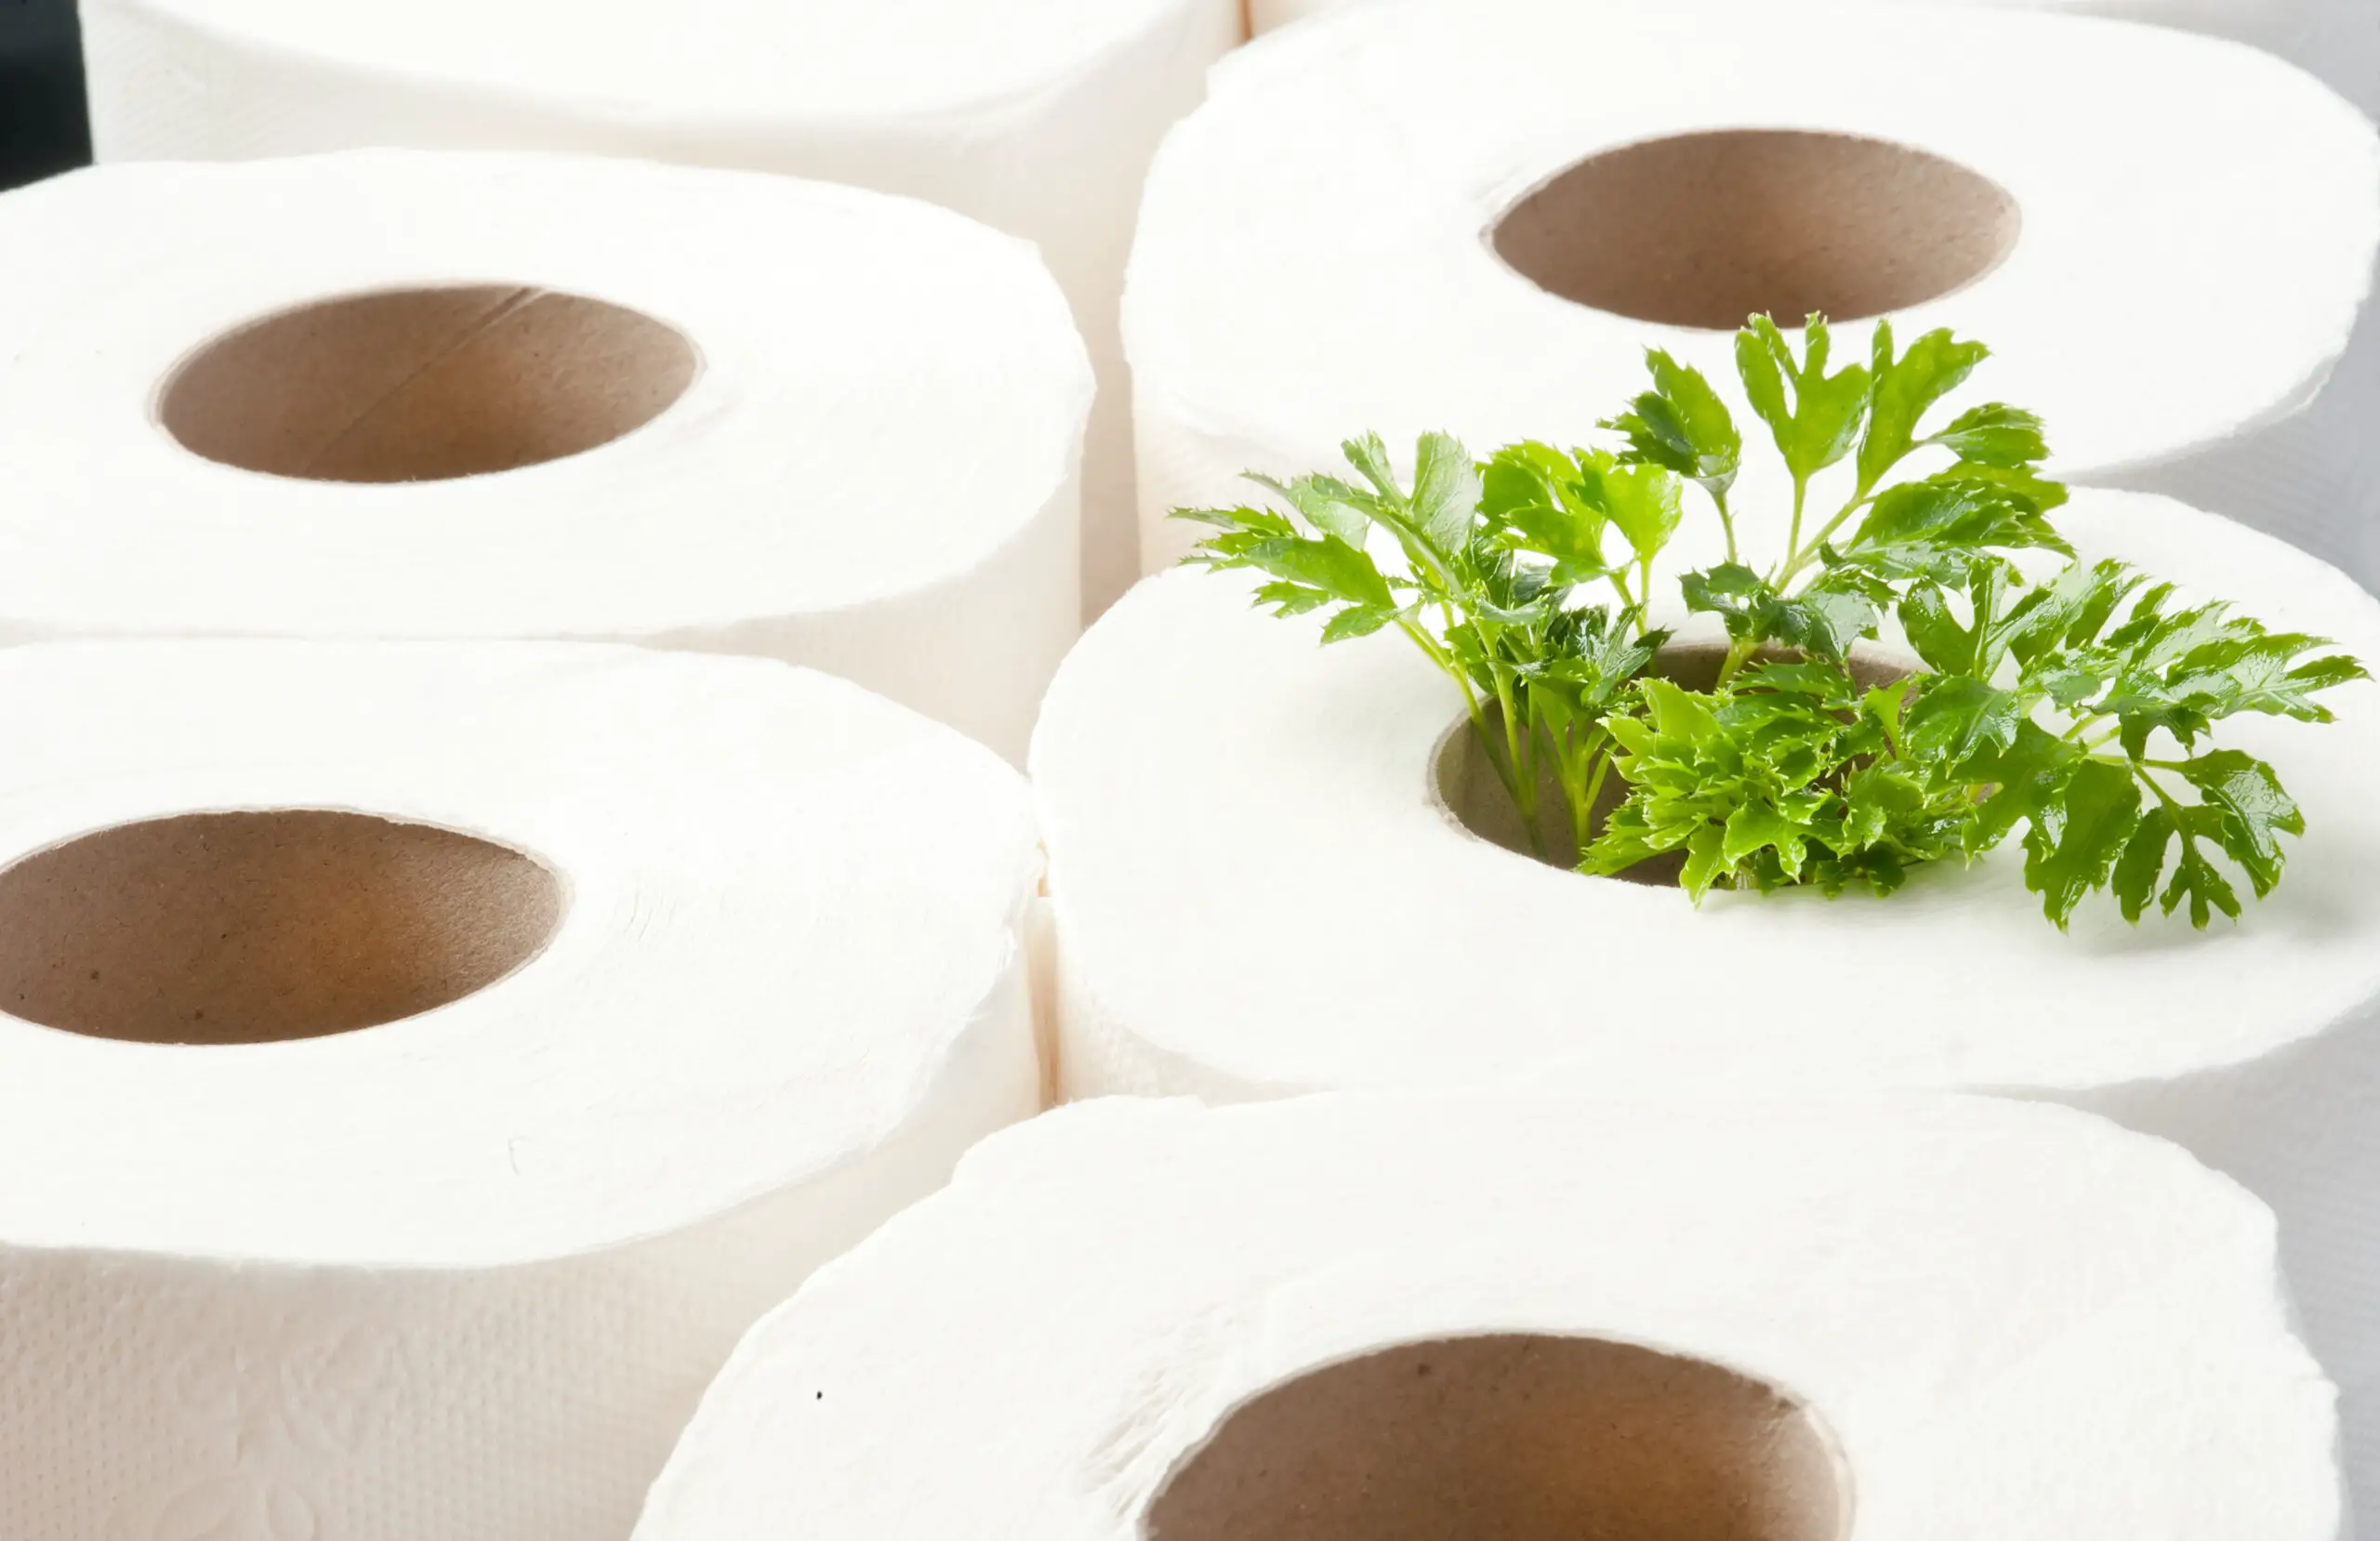 rolls of toilet paper with the plant inside